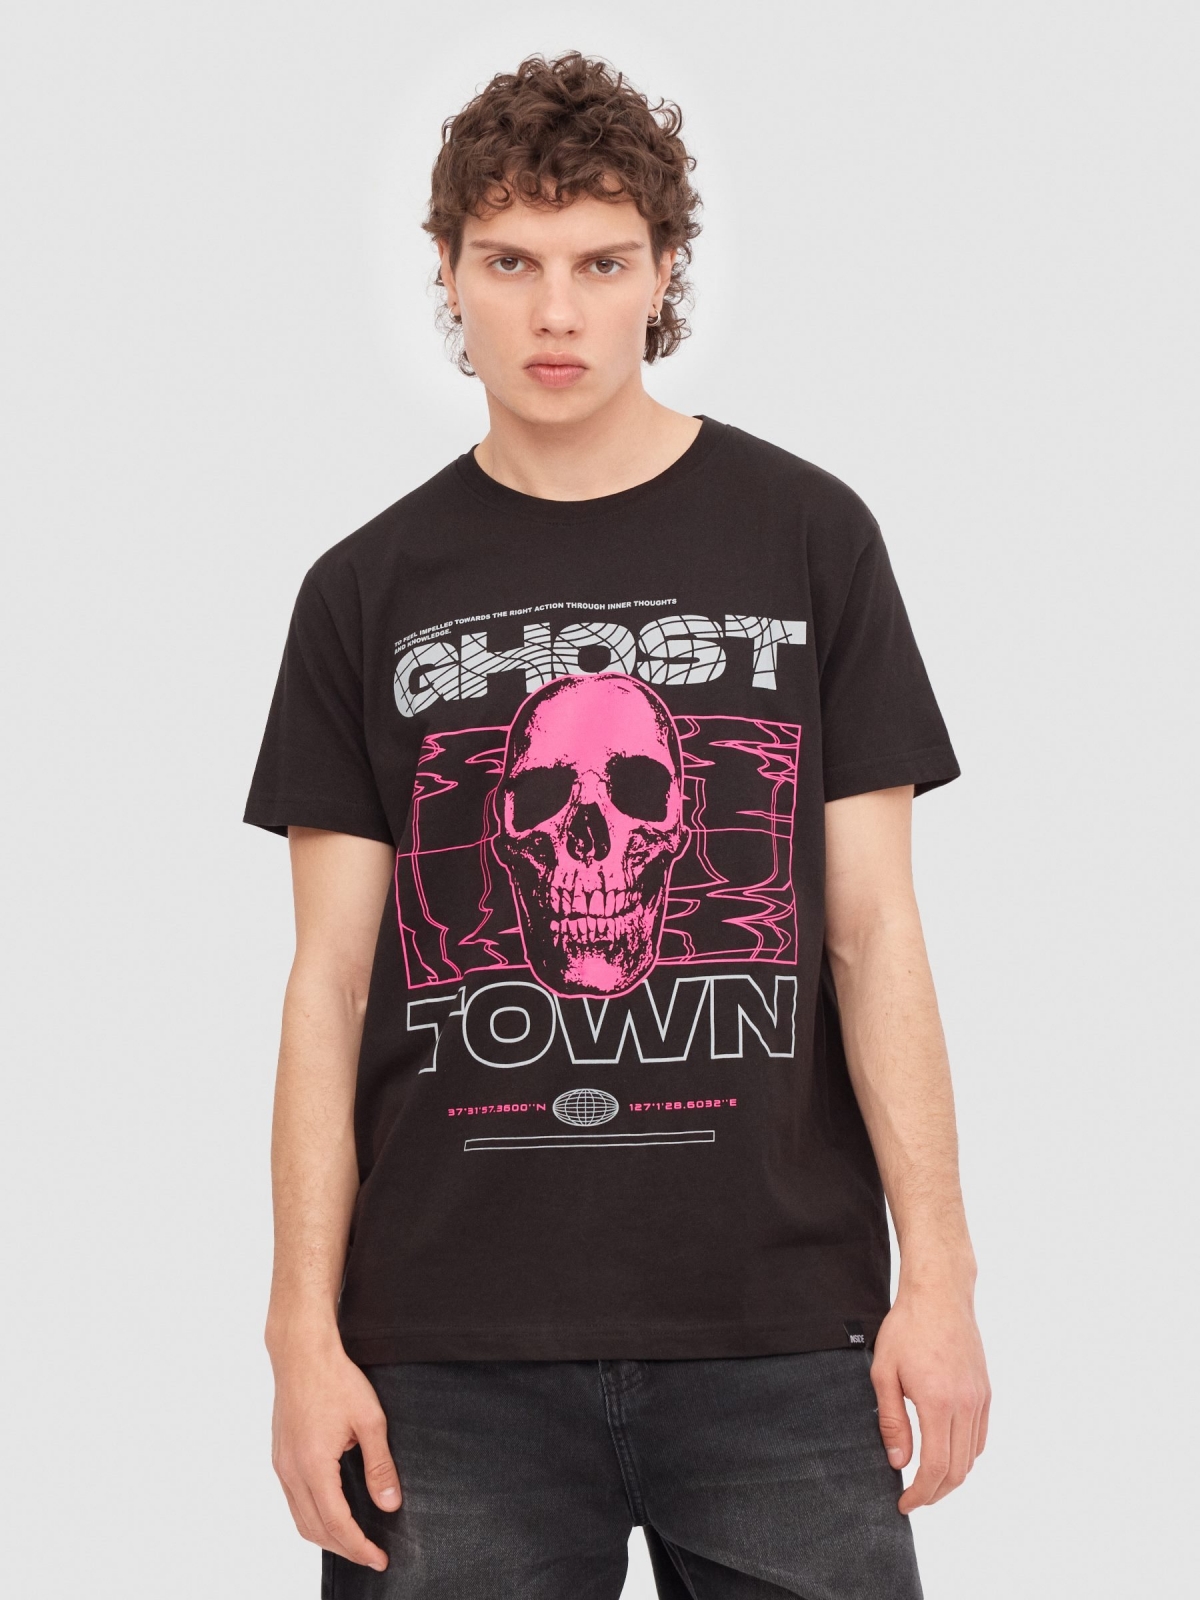 Neon skull t-shirt black middle front view